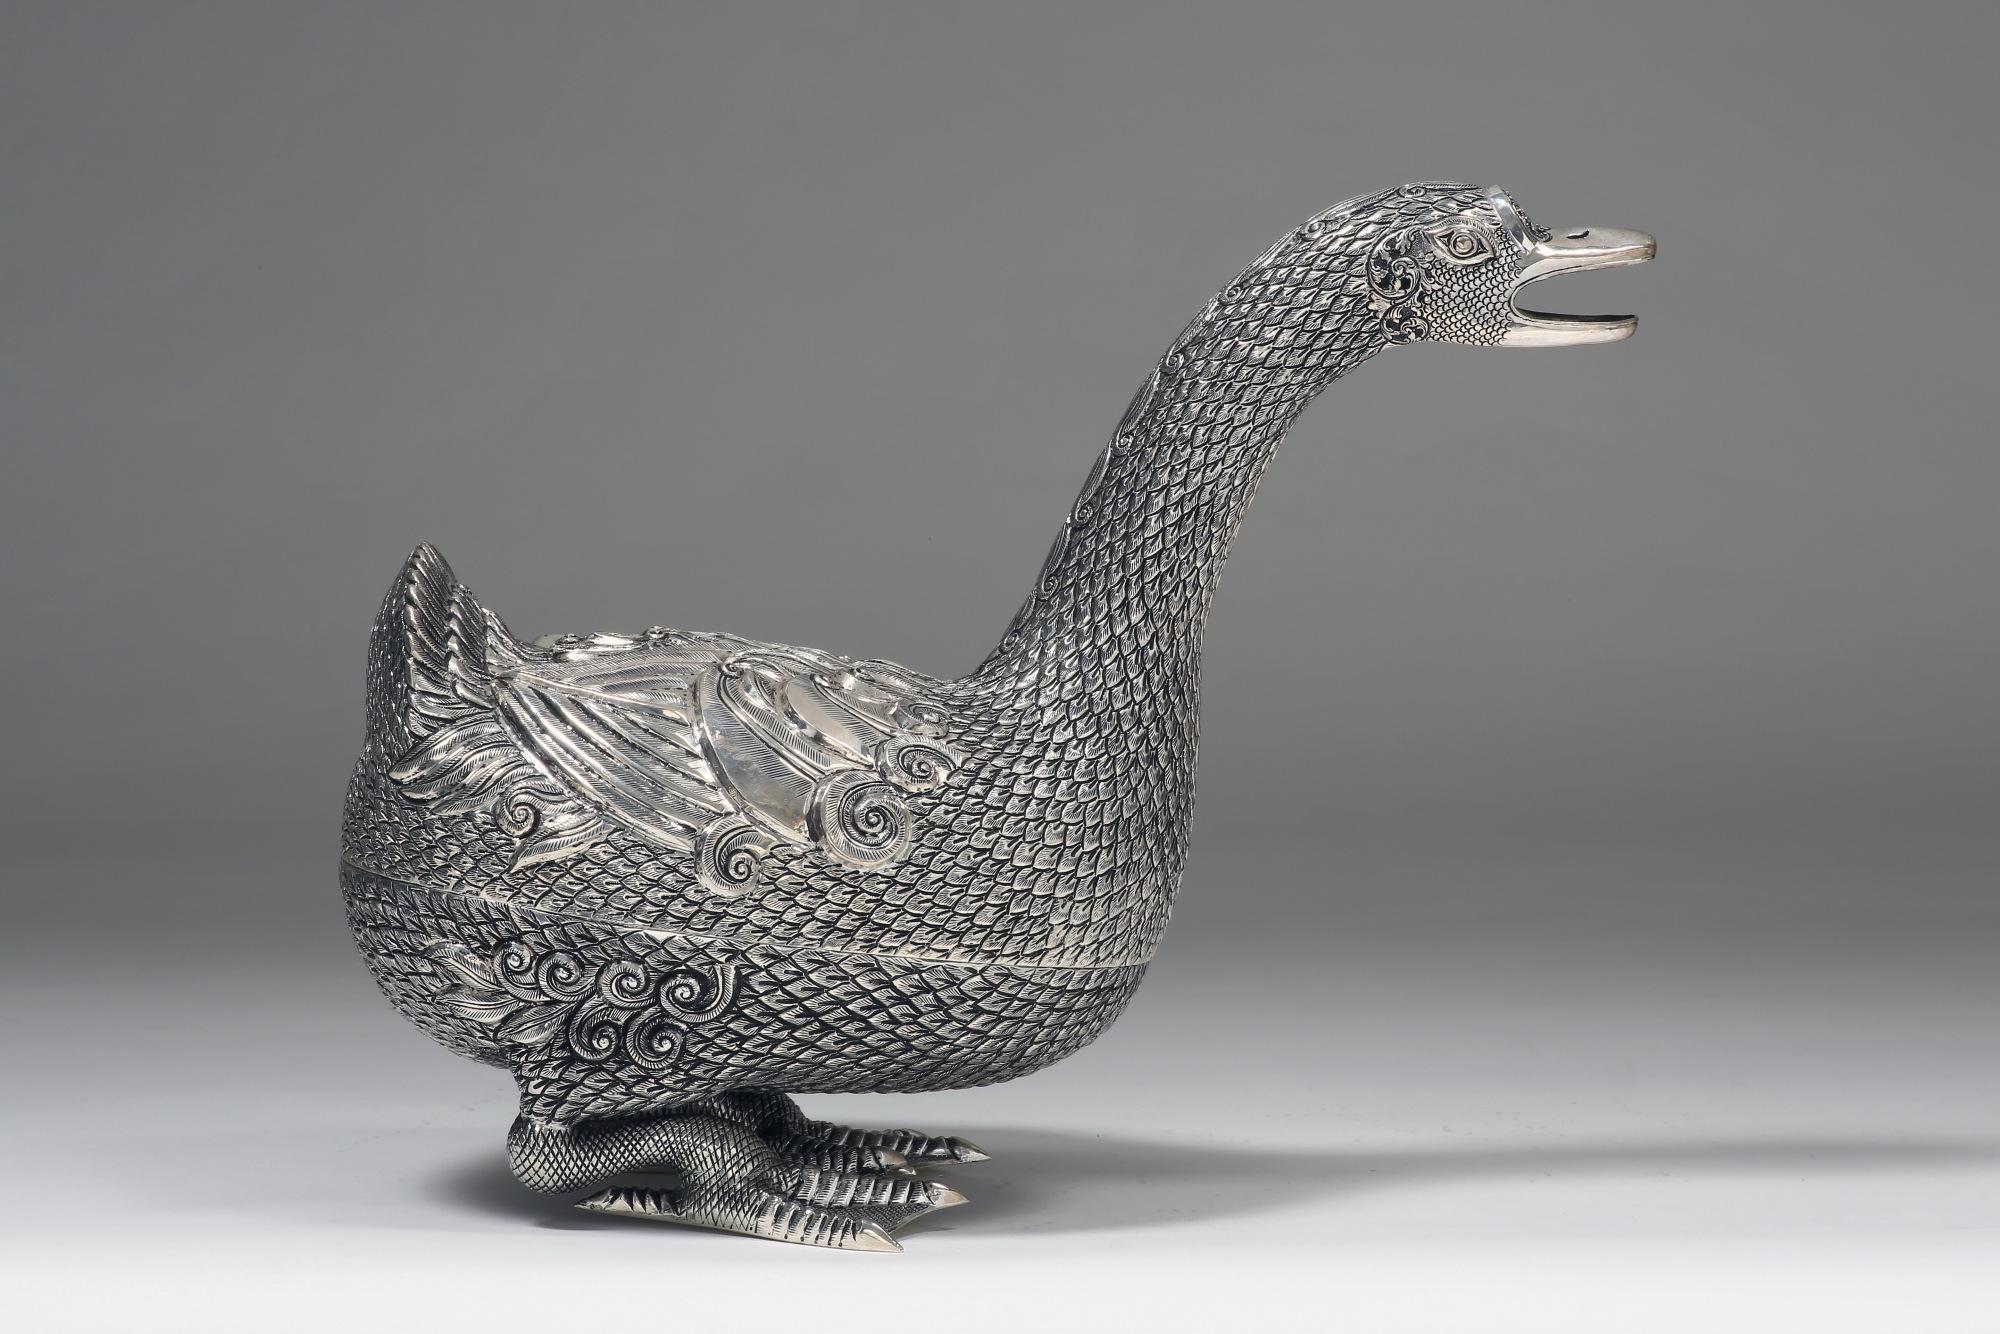 The contemporary solid silver goose box is handcrafted by experienced silversmiths with fine techniques. Every feather on the goose is vividly presented with details and textures. It is designed to be opened for storage space.
A pair is